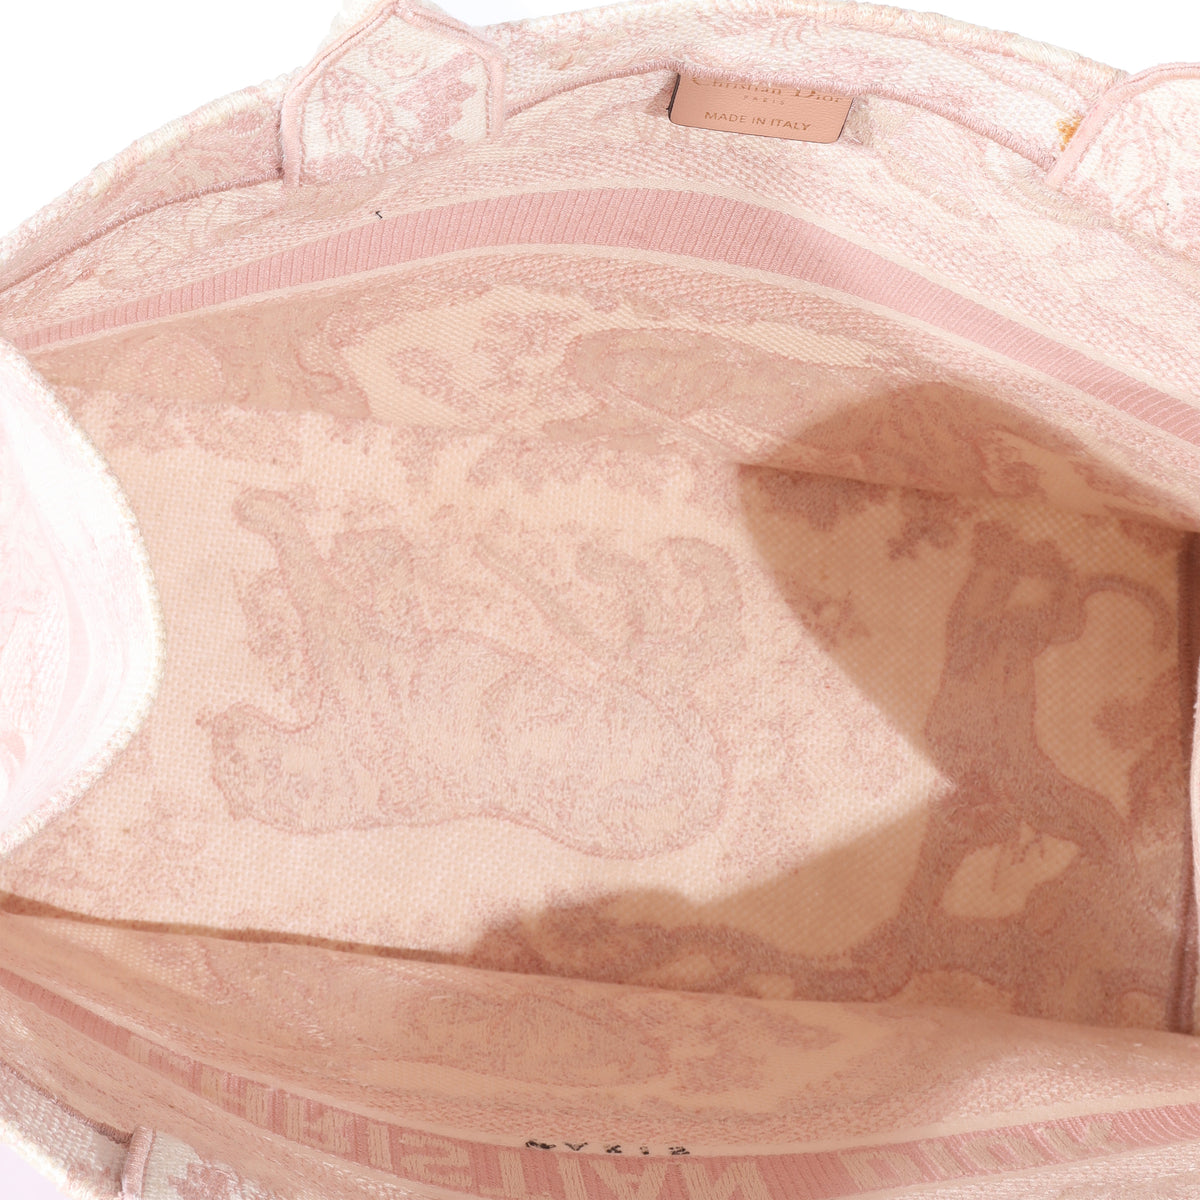 Christian Dior Pink Toile de Jouy Embroidery Medium Book Tote For